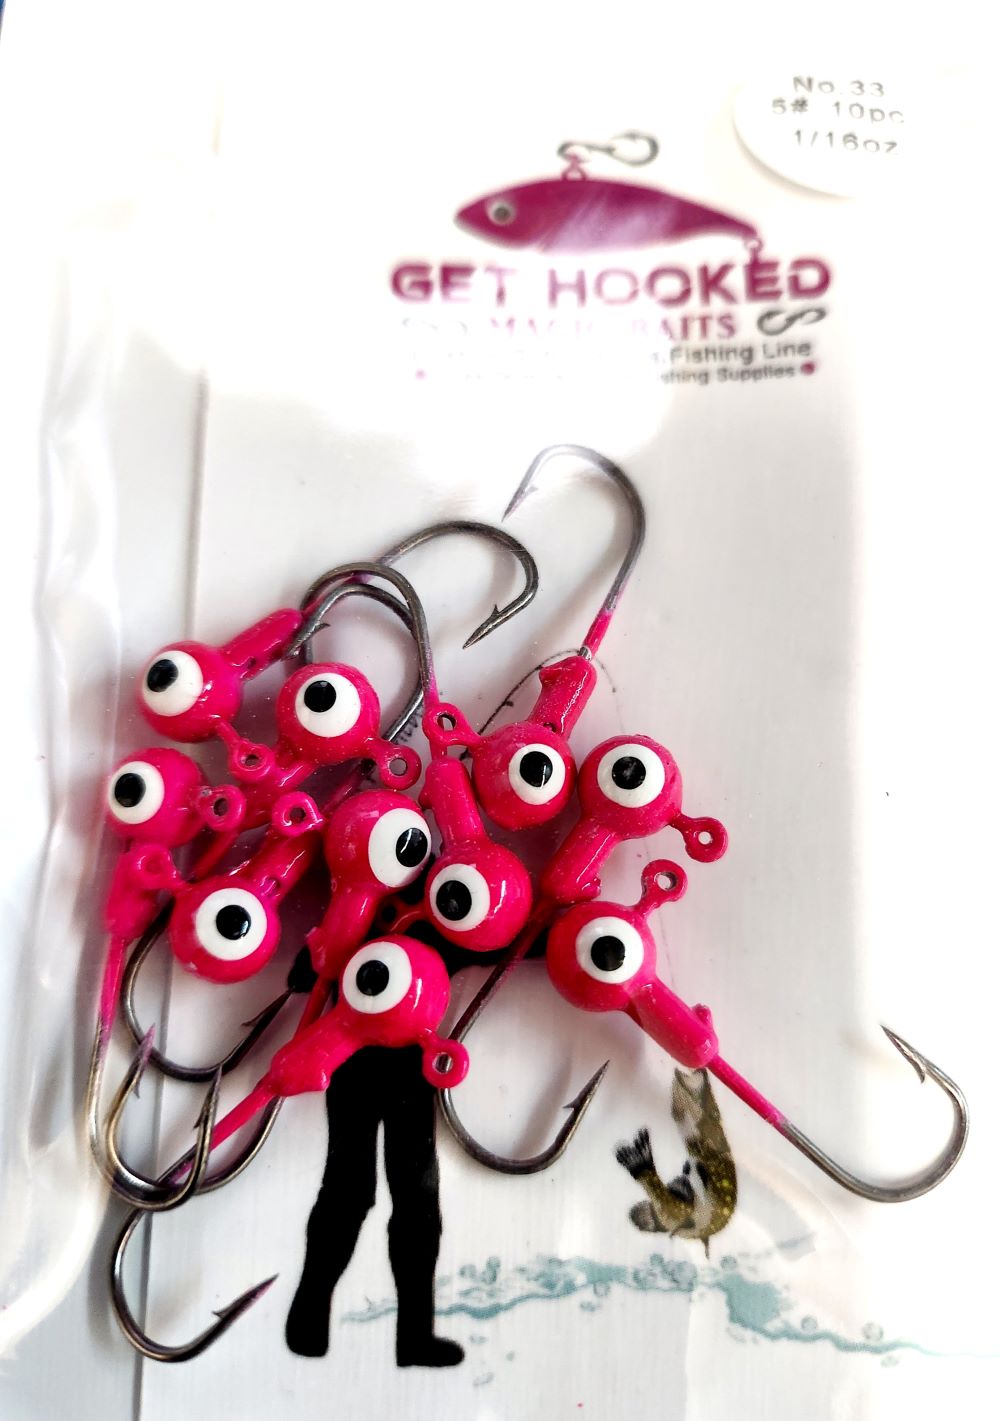 1/16 oz. Horse Head Hot Pink Jig Head with Spinner - 10 Pack